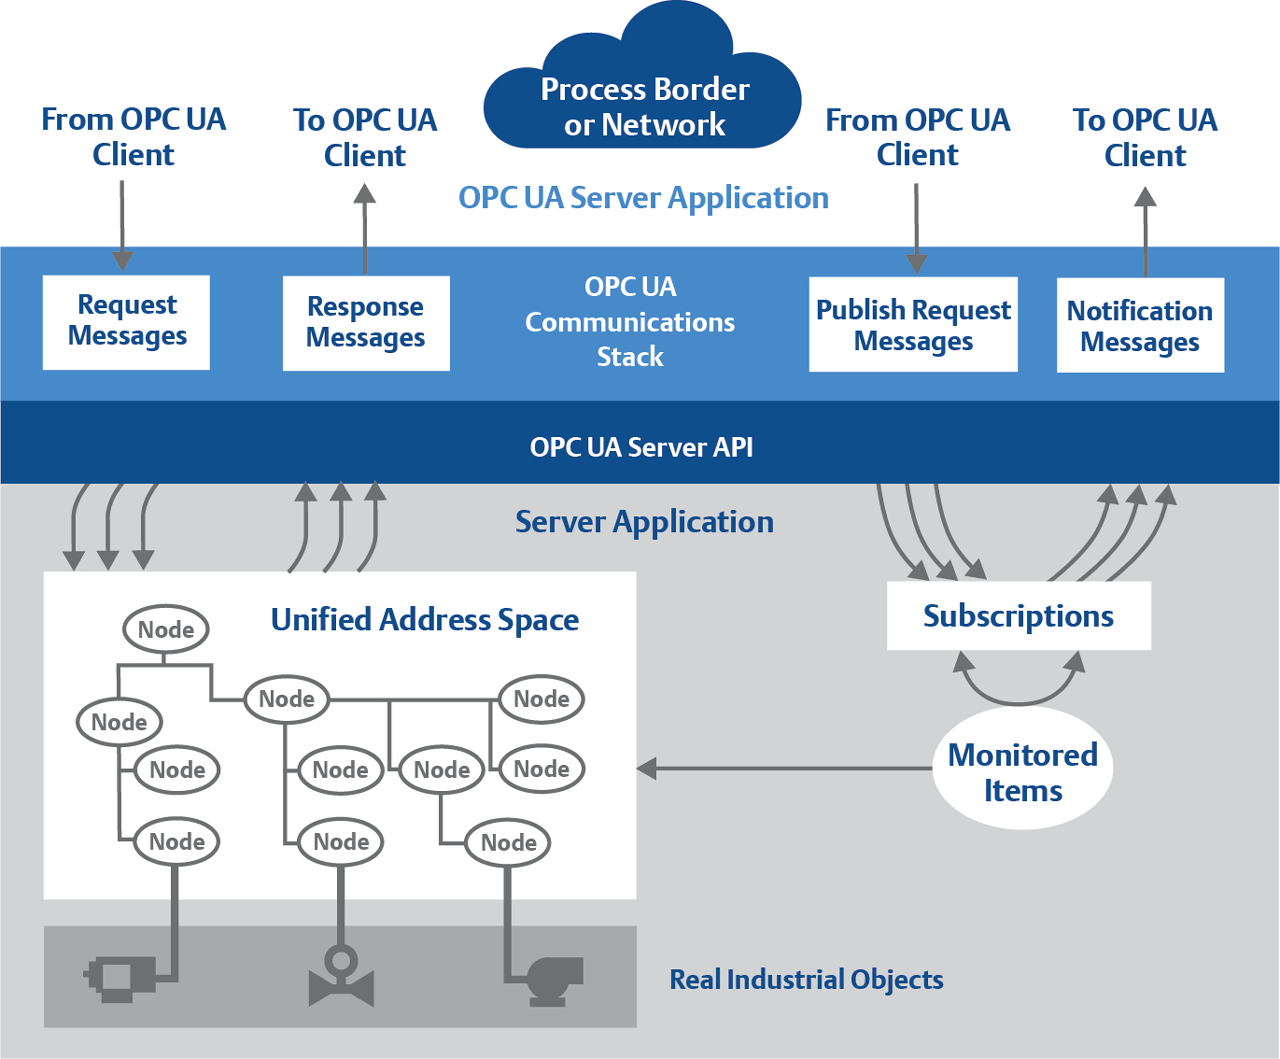 The OPC UA industrial communications protocol provides security and data contextualization using a platform independent architecture.